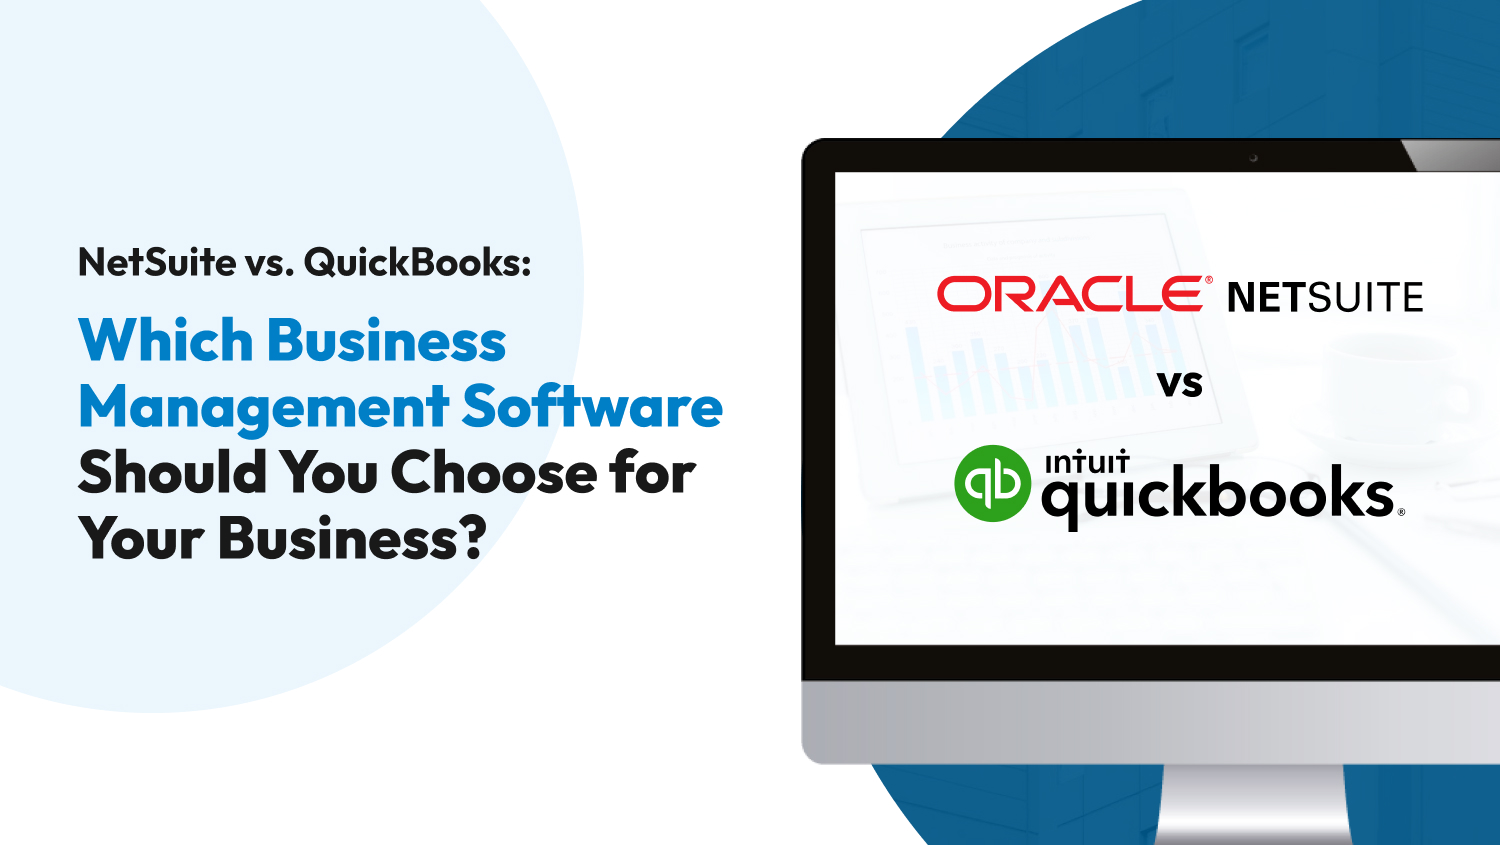 NetSuite vs. QuickBooks: Which Business Management Software Should You Choose for Your Business?